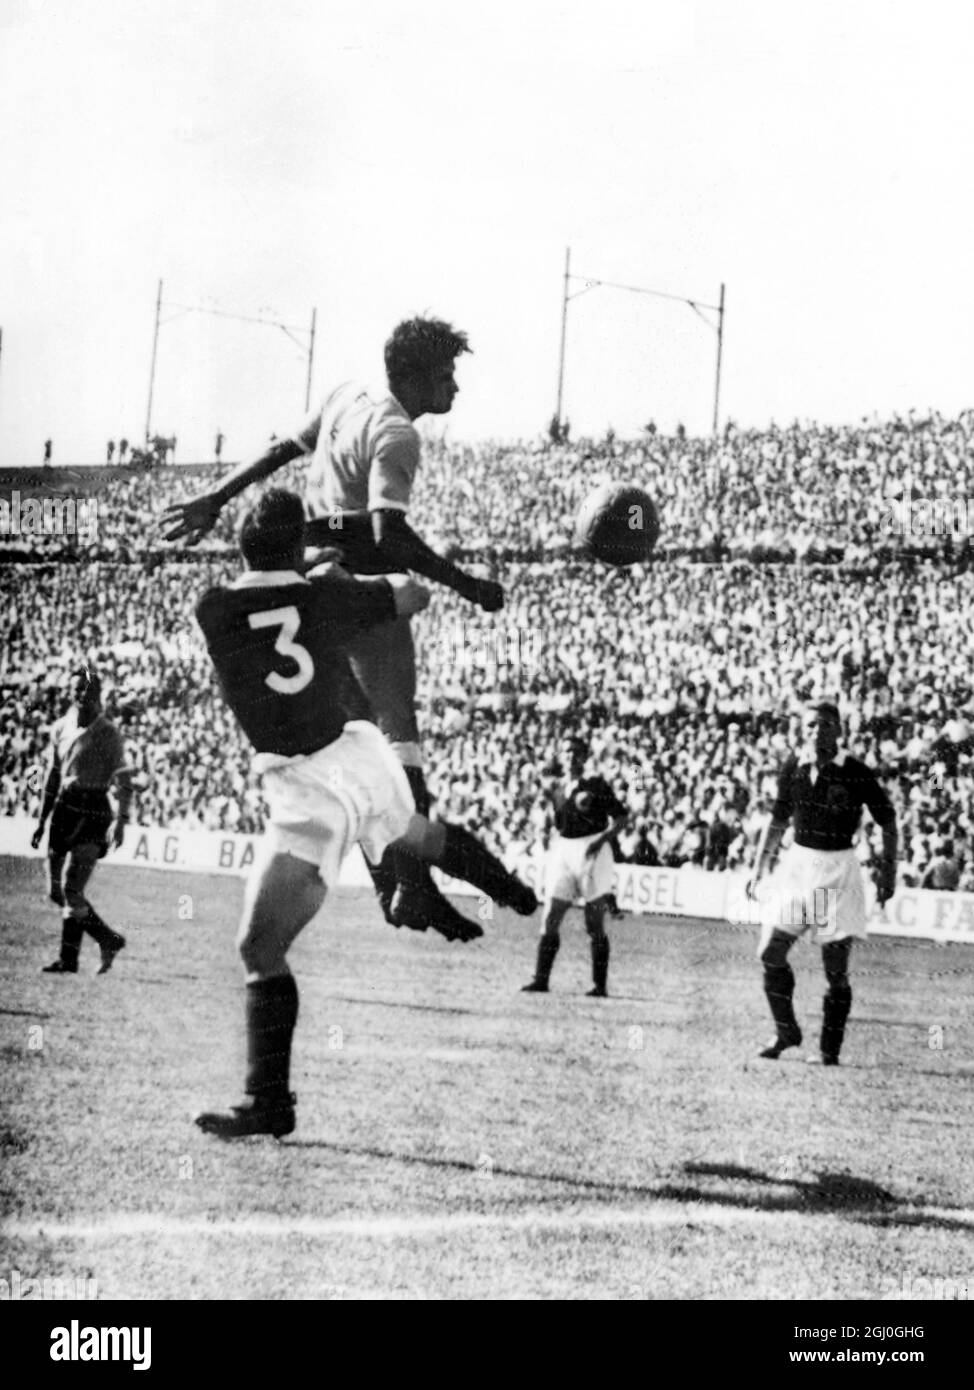 1954 World Cup Uruguay v Scotland J. Aird (back to camera, No.3) of the Scottish team and J. Abadie fighting for the ball. In the background (right) are Scottish players, Fernie on the left, and W. Cunningham on the right. 19th June 1954 Stock Photo